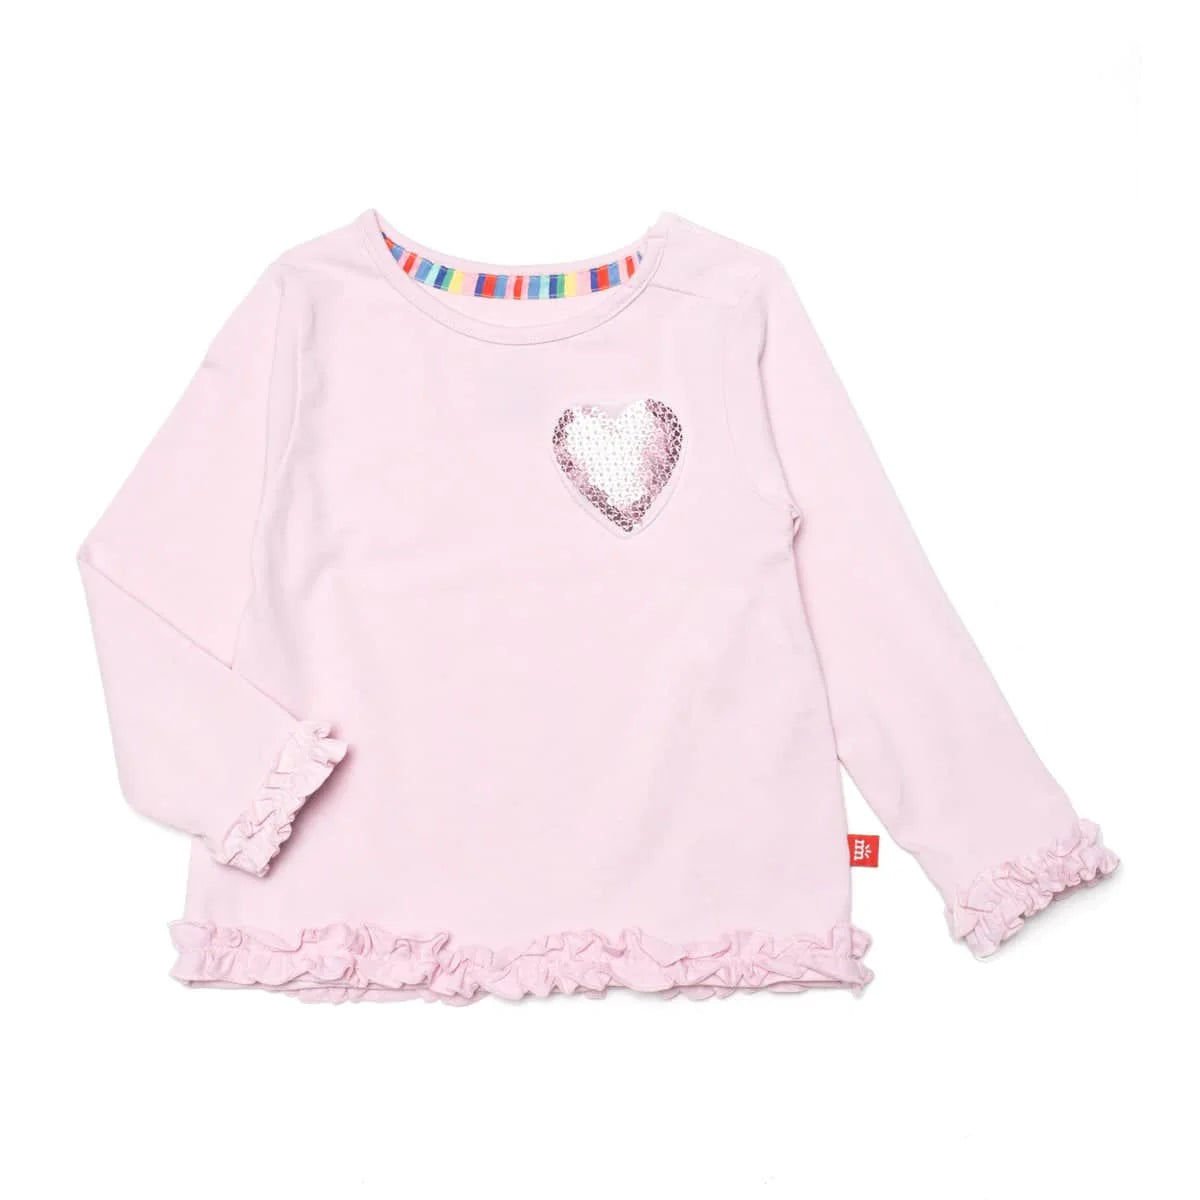 magnetic play all day top